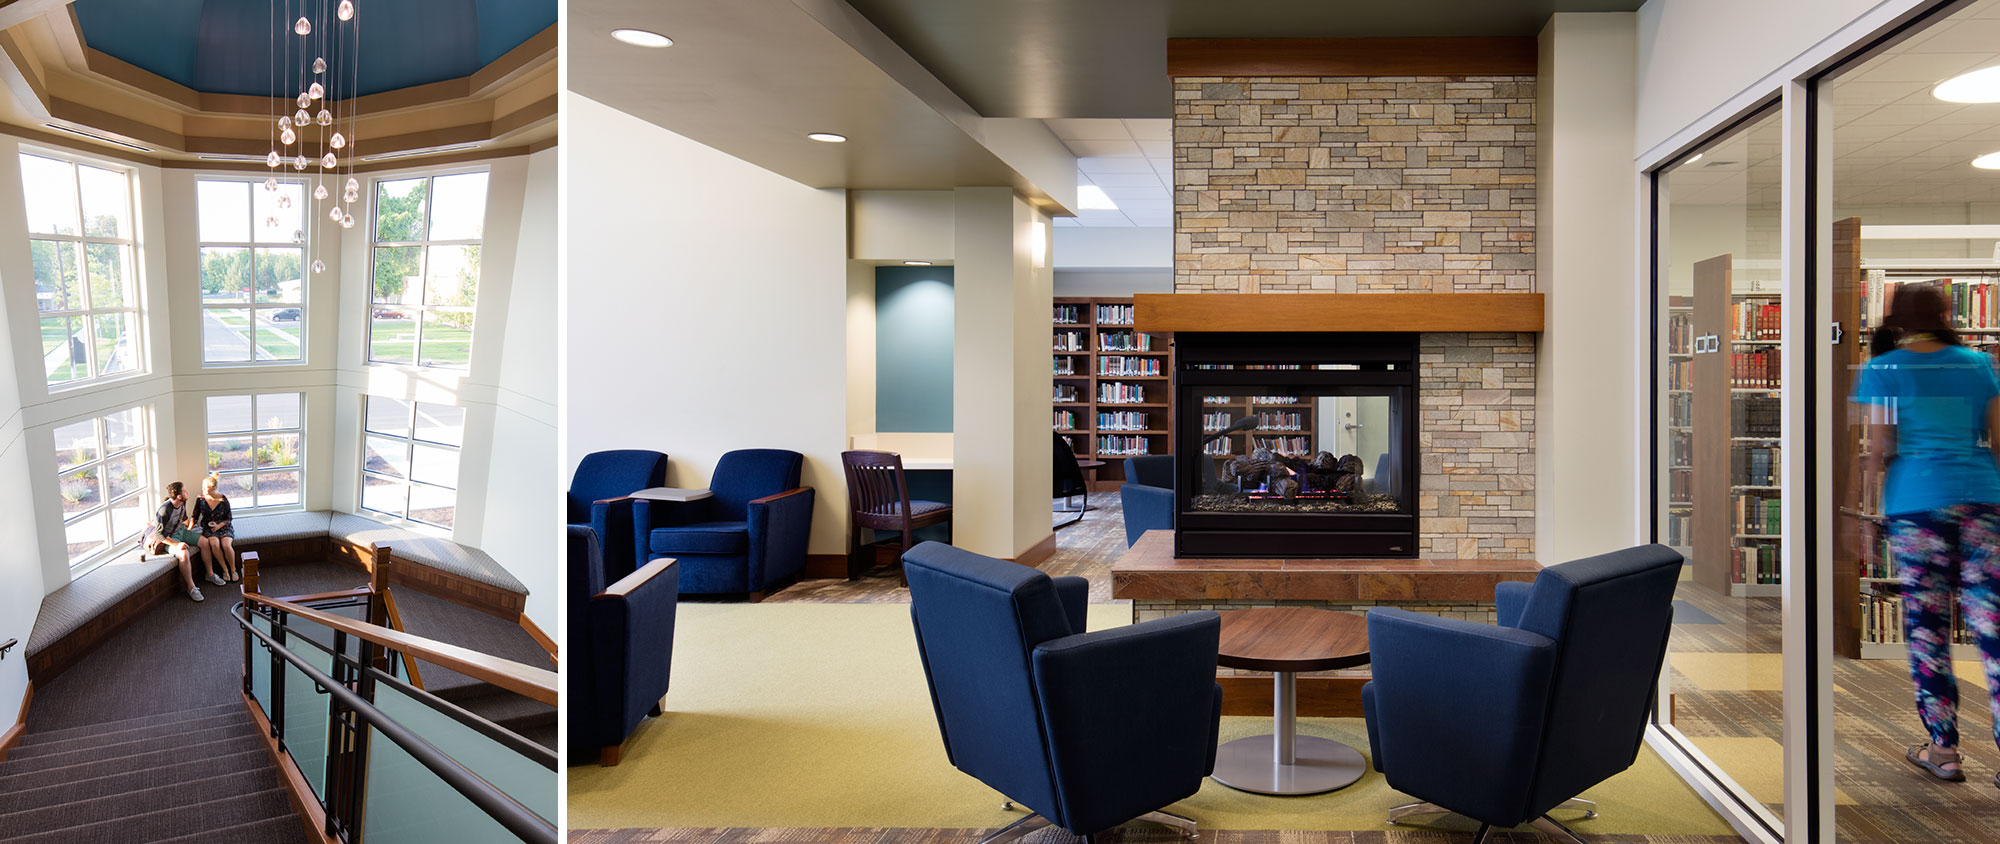 Northwest Nazarene University Leah Peterson Learning Commons & Riley Library